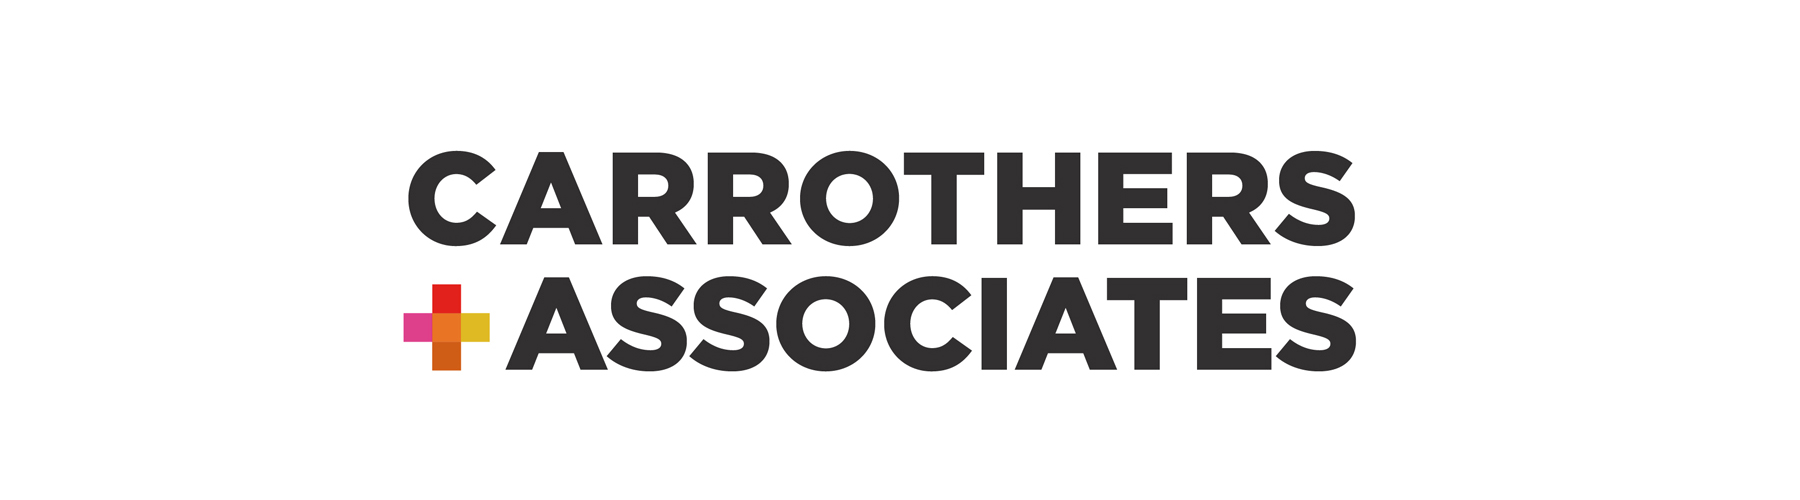 Carrothers and Associates - Logo Design and Branding Redesign